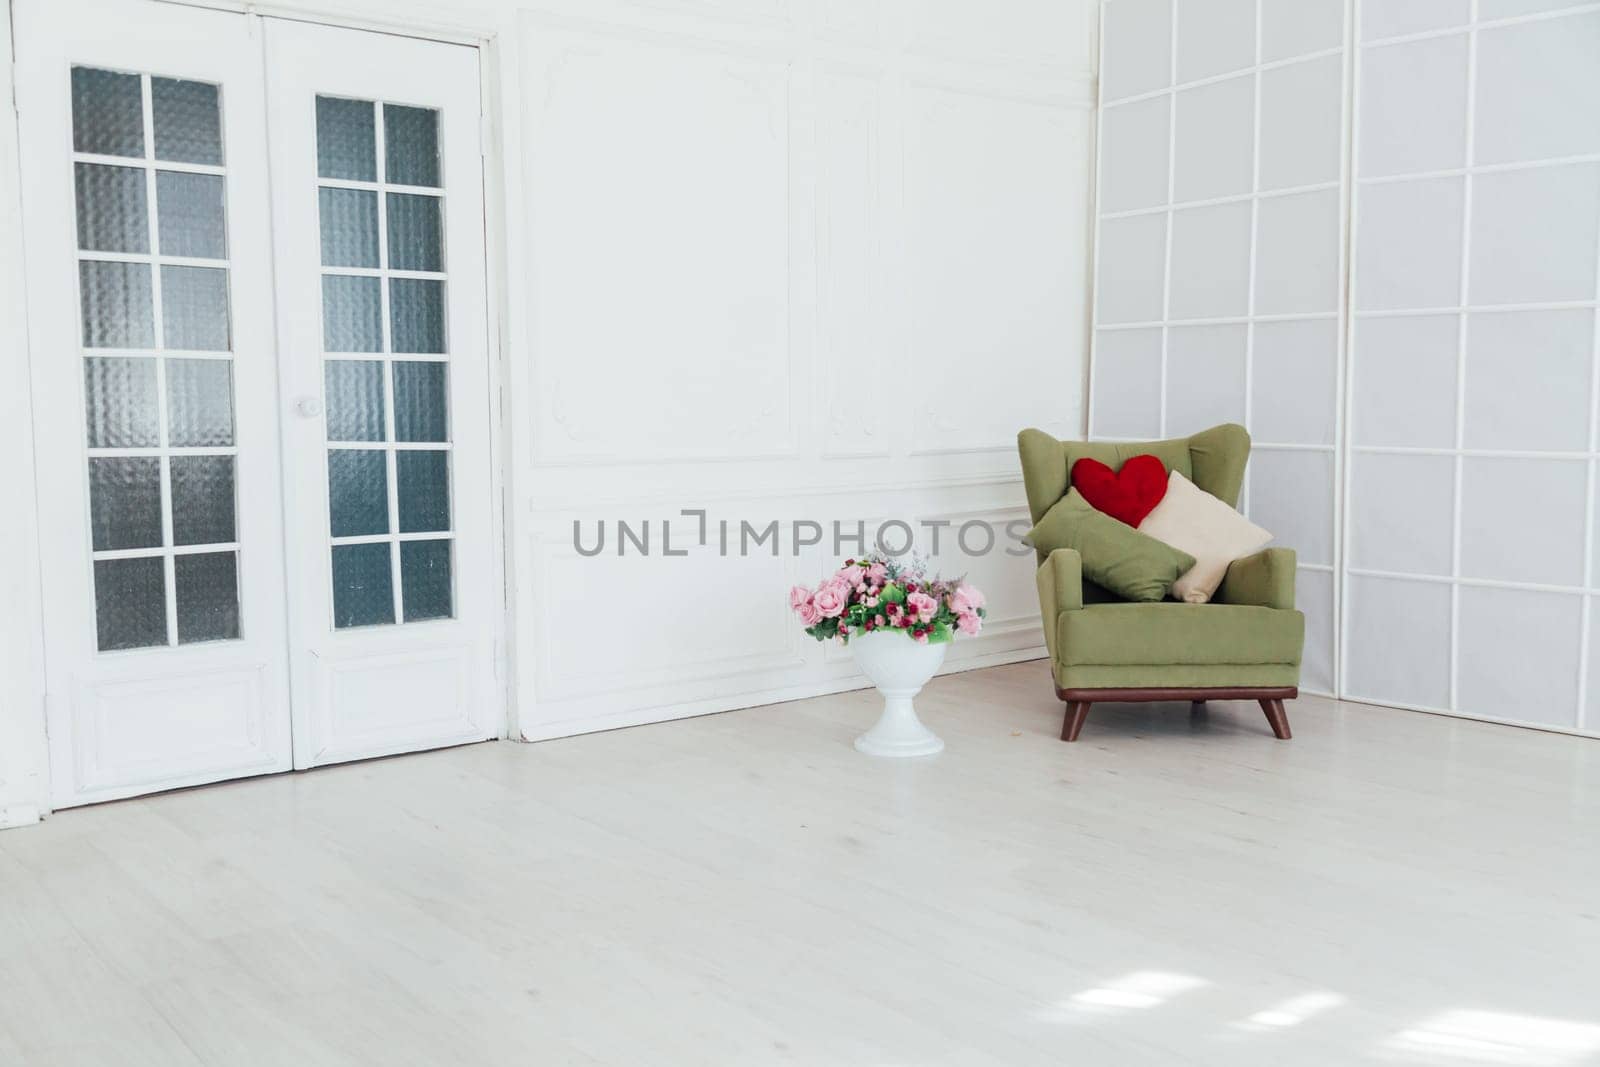 green chair in the interior of an empty white room